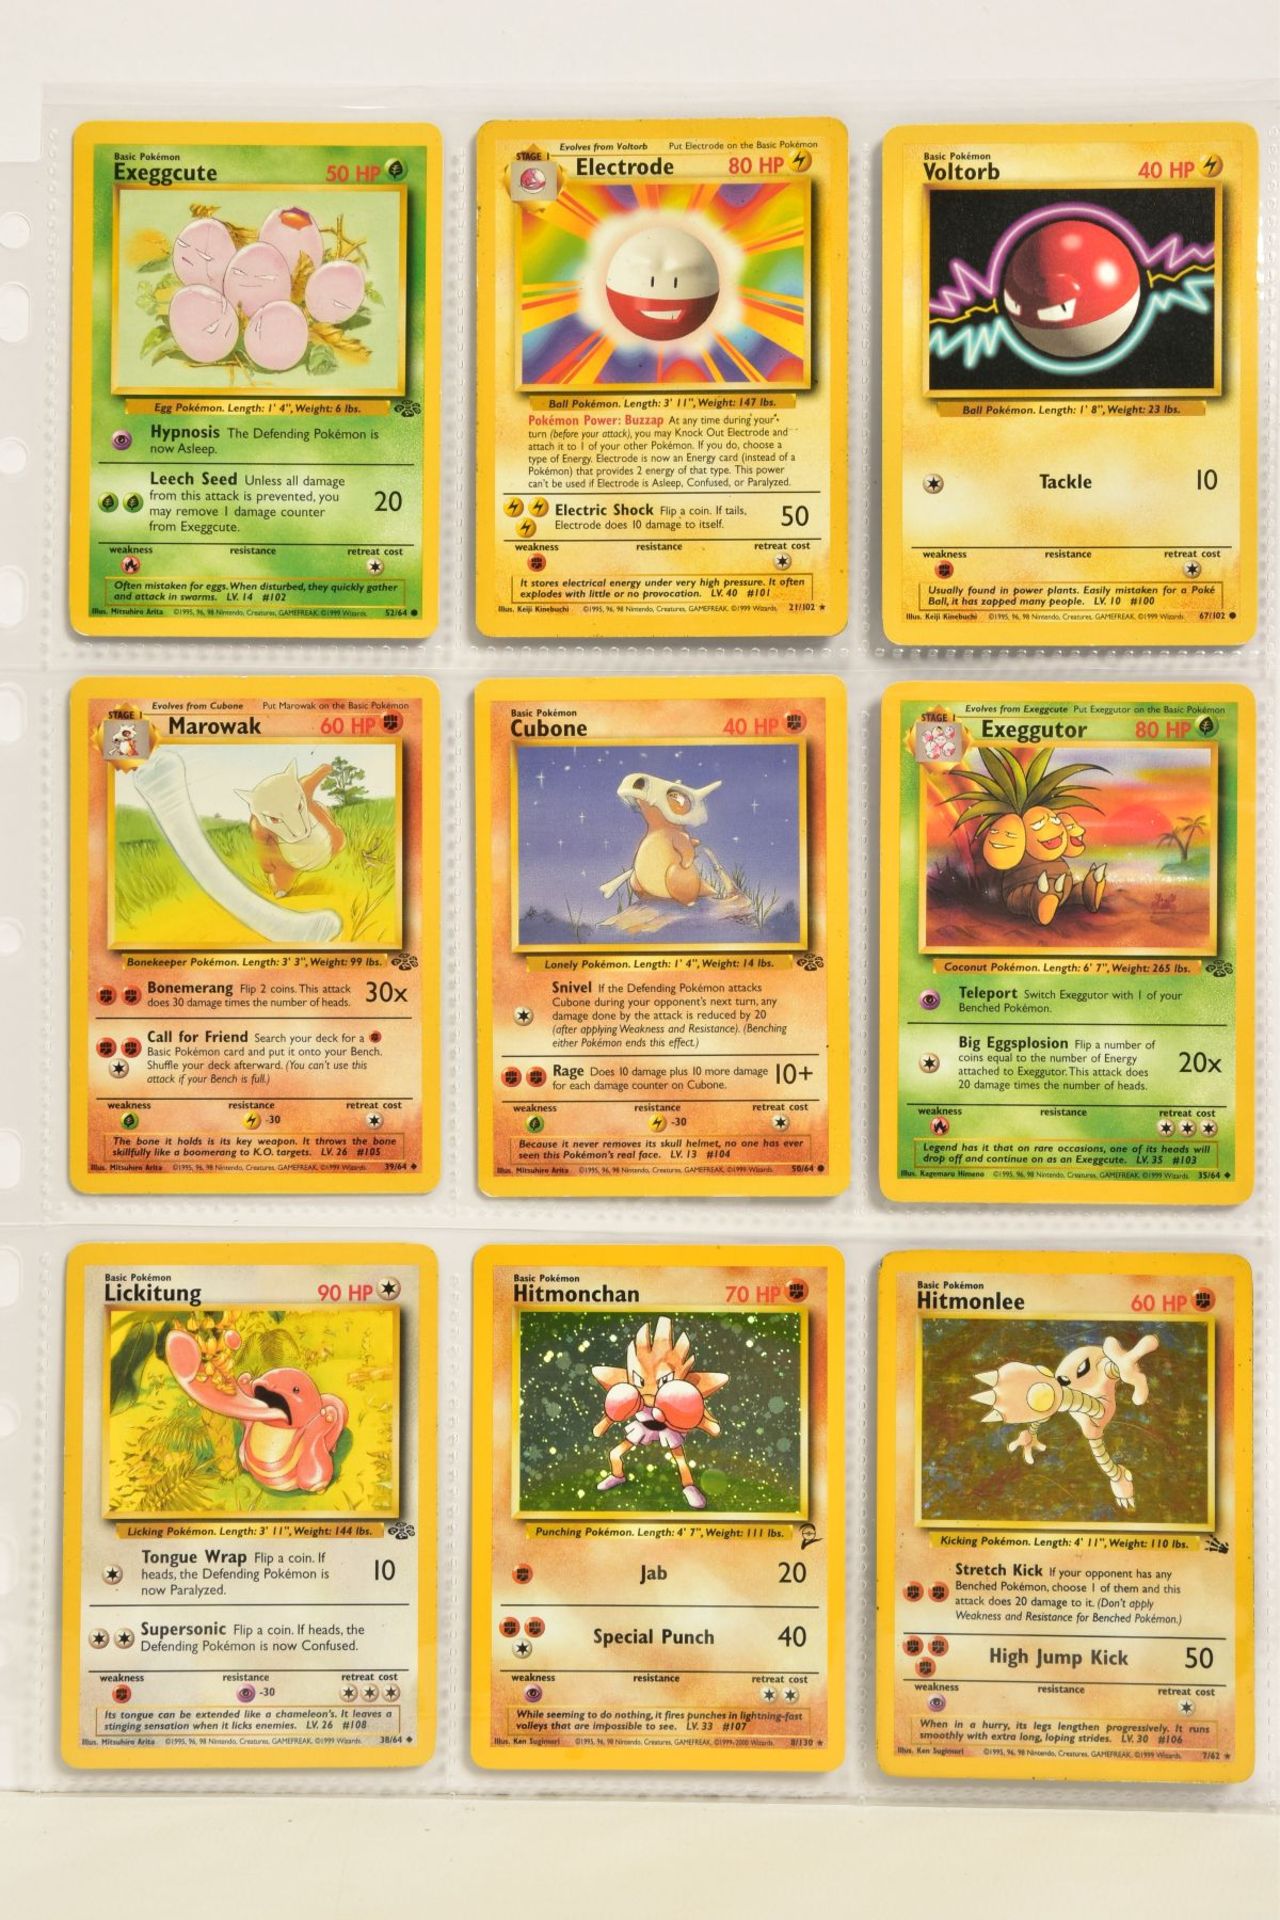 POKEMON THE TRADING CARD GAME 154 CARDS IN POKEMON TCG FOLDER, includes one of each of the - Image 13 of 20